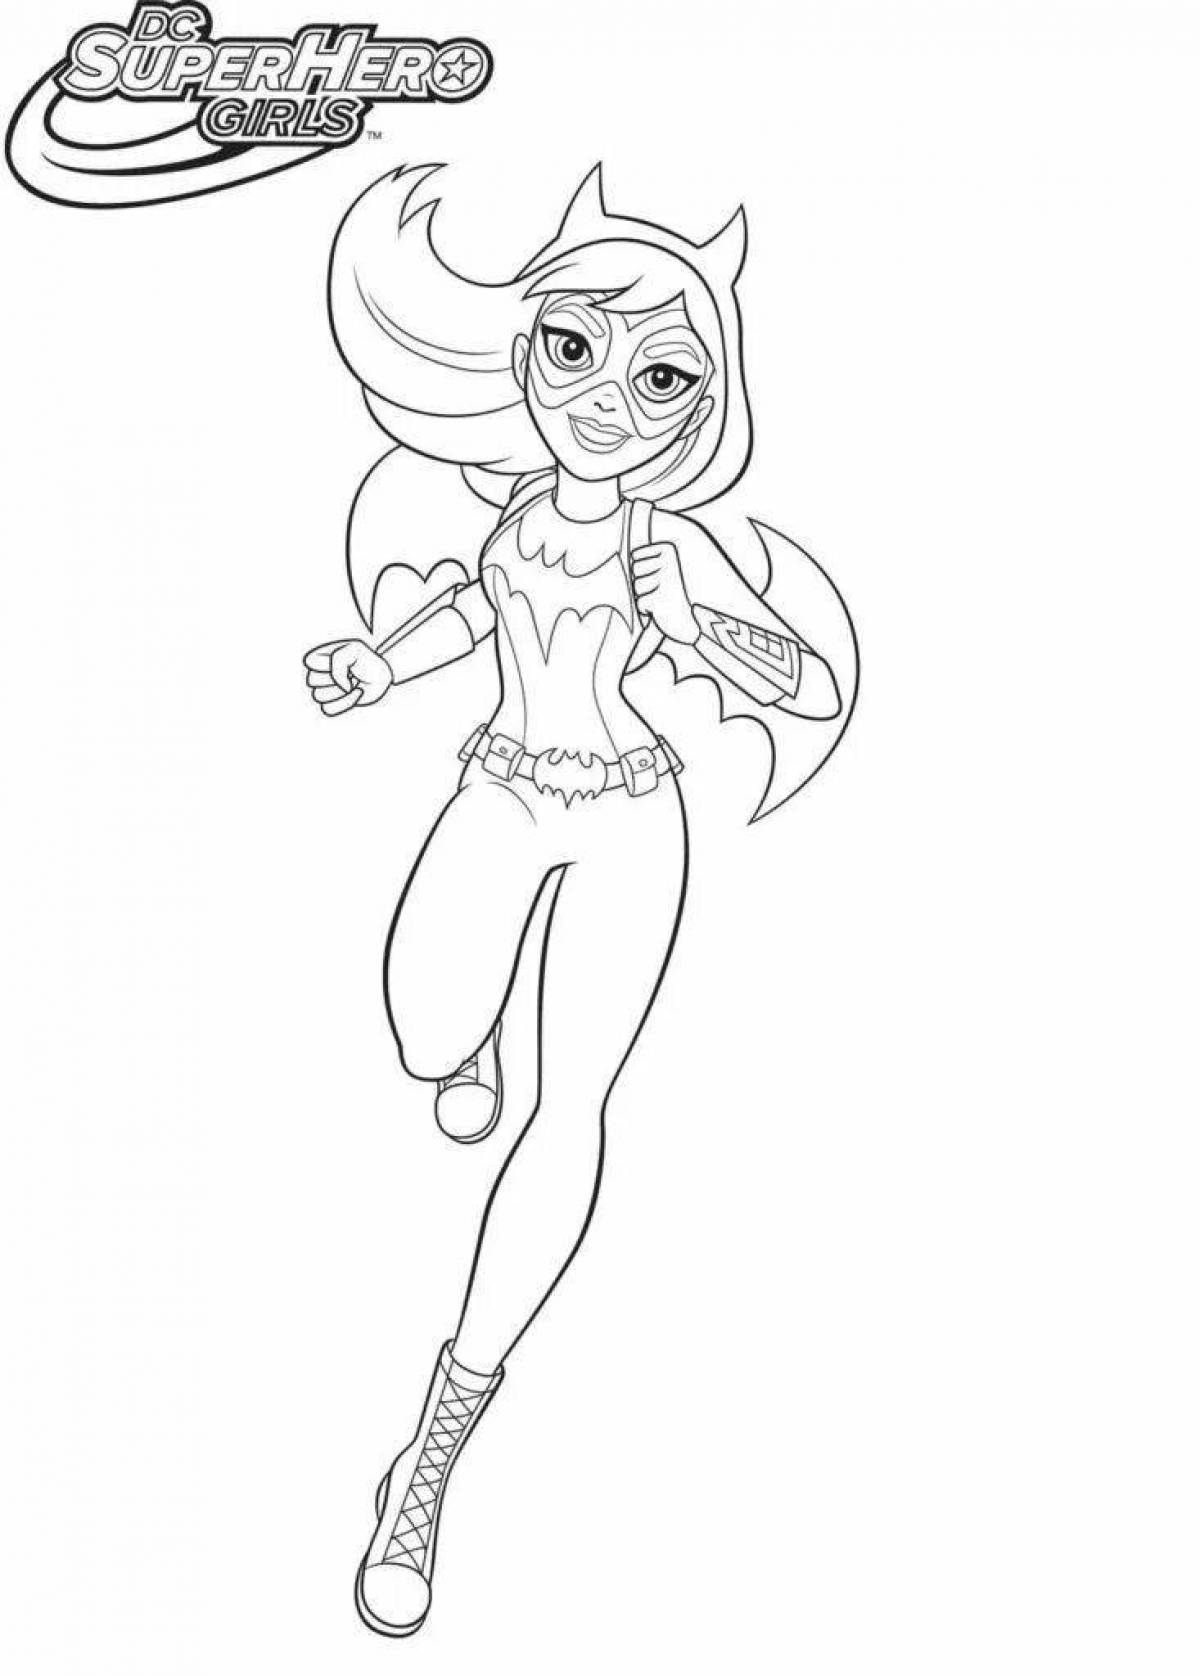 Funny superhero girls coloring pages